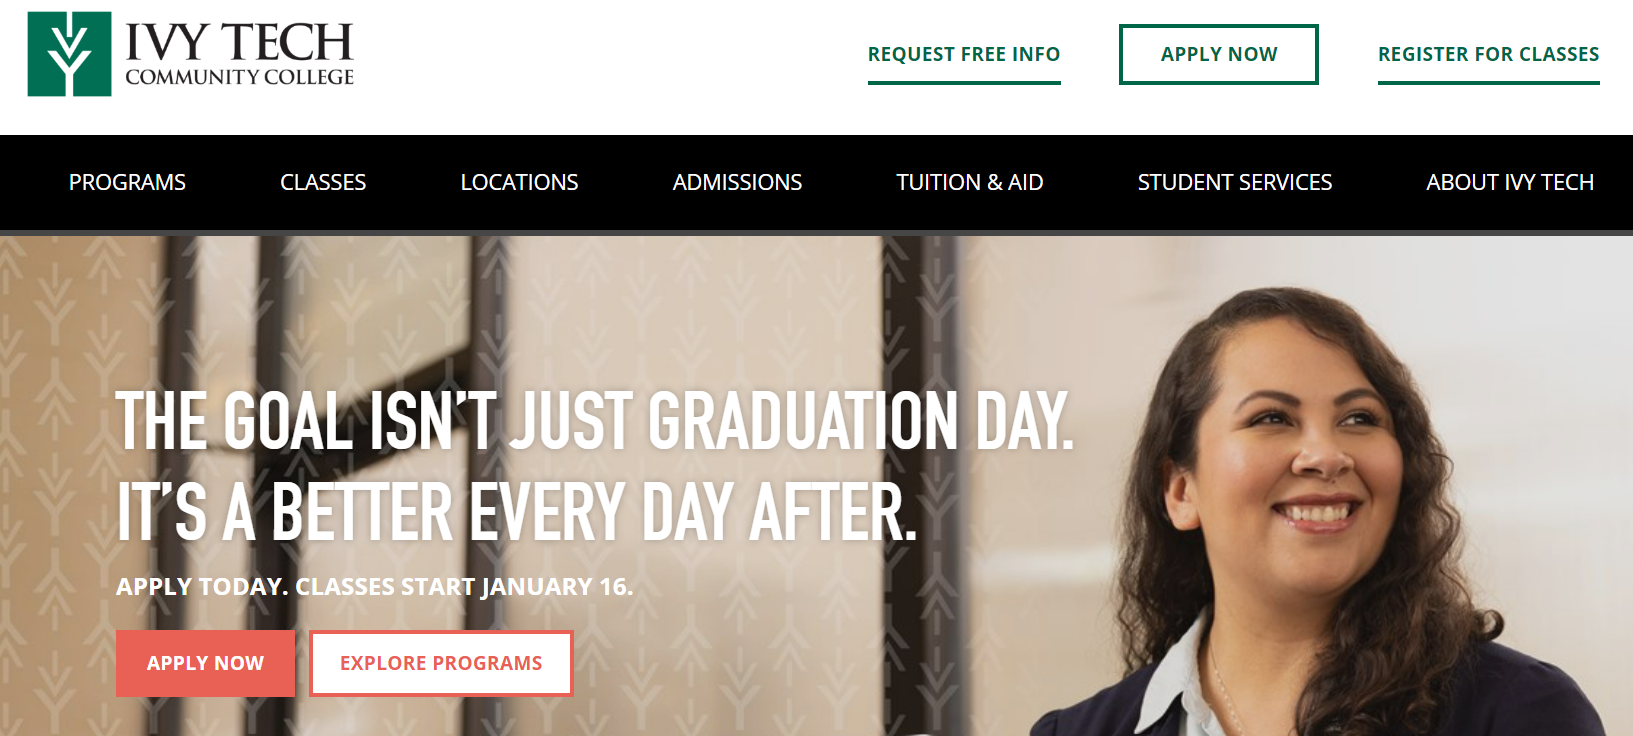 Ivy Tech Community College homepage